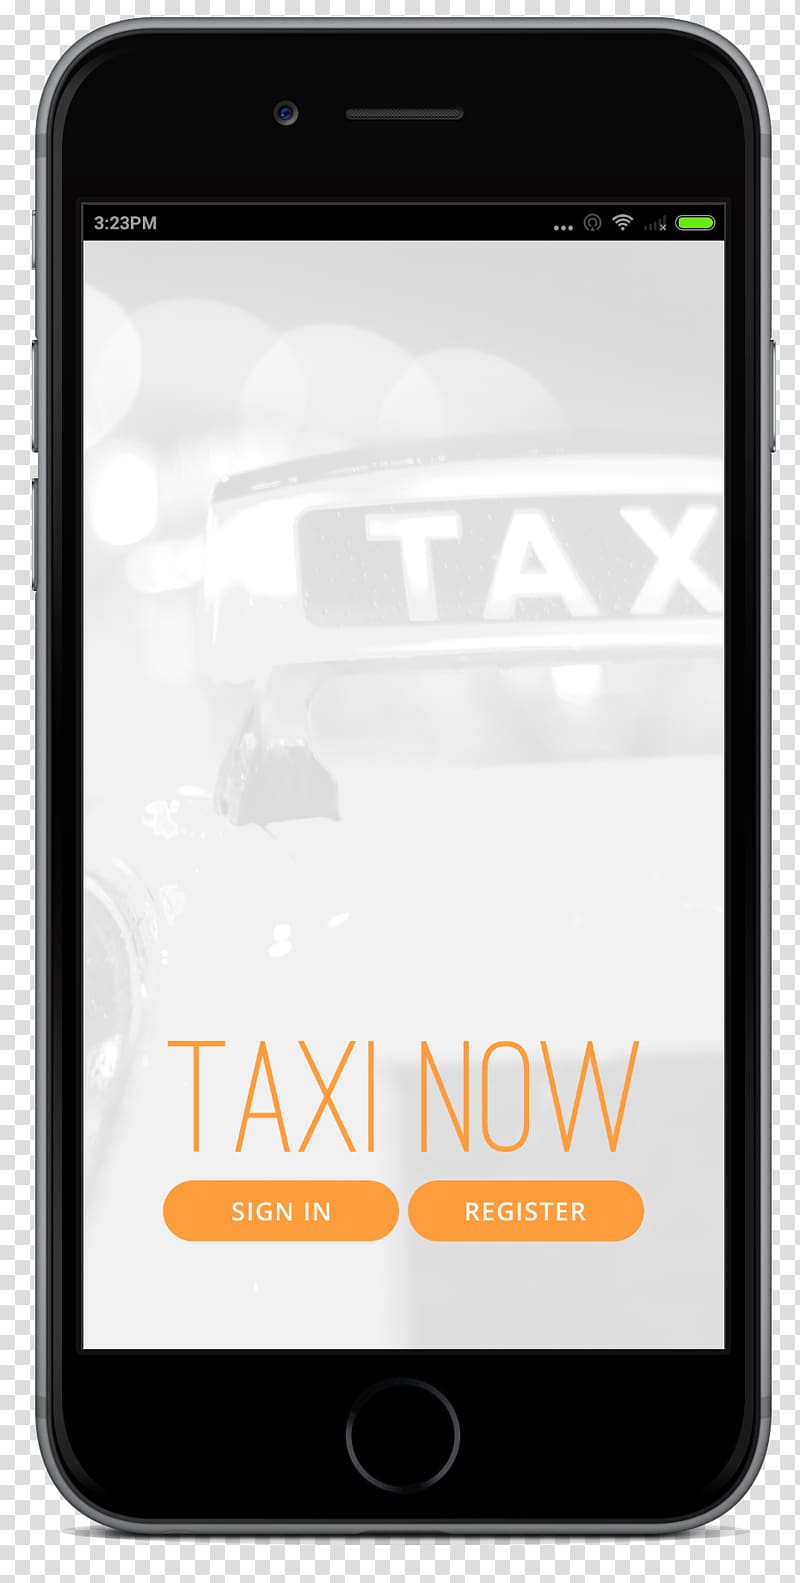 Feature phone Smartphone Taxi Uber Mobile Phones, taxi app transparent background PNG clipart